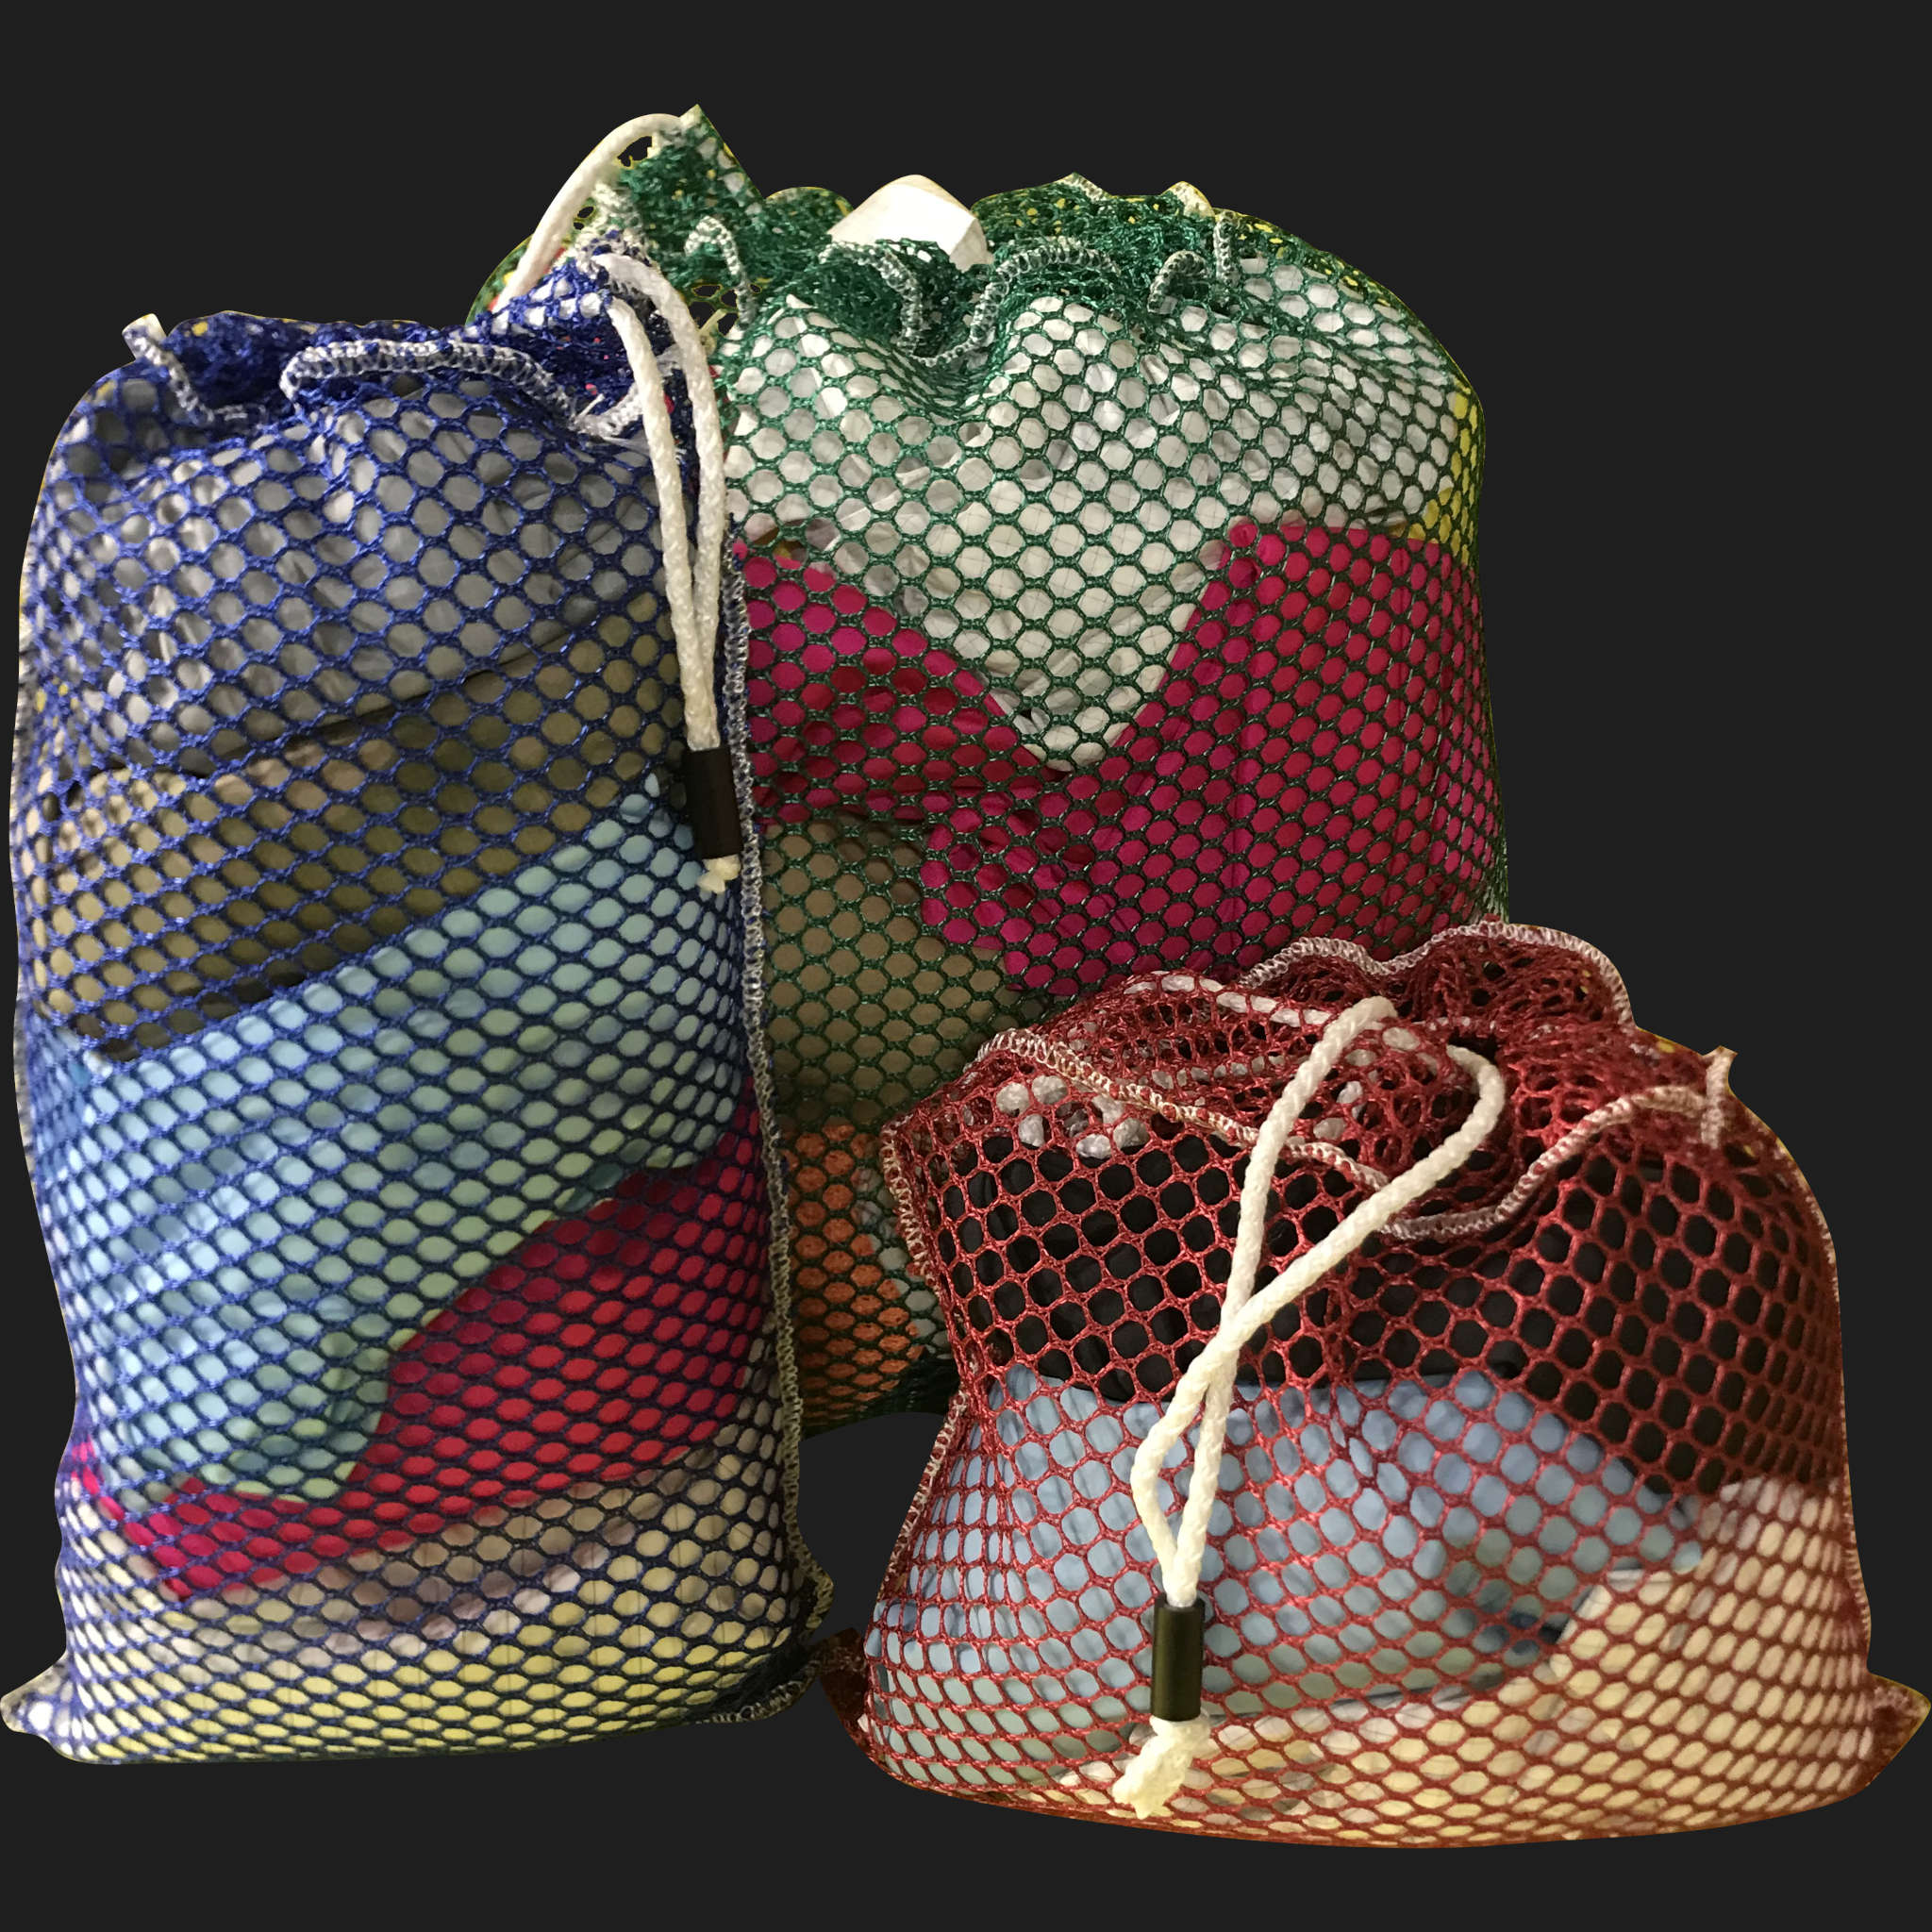 36" x 52" Customized Mesh-Net-Laundry Bags Heavy Duty with Cord and barrellock closure